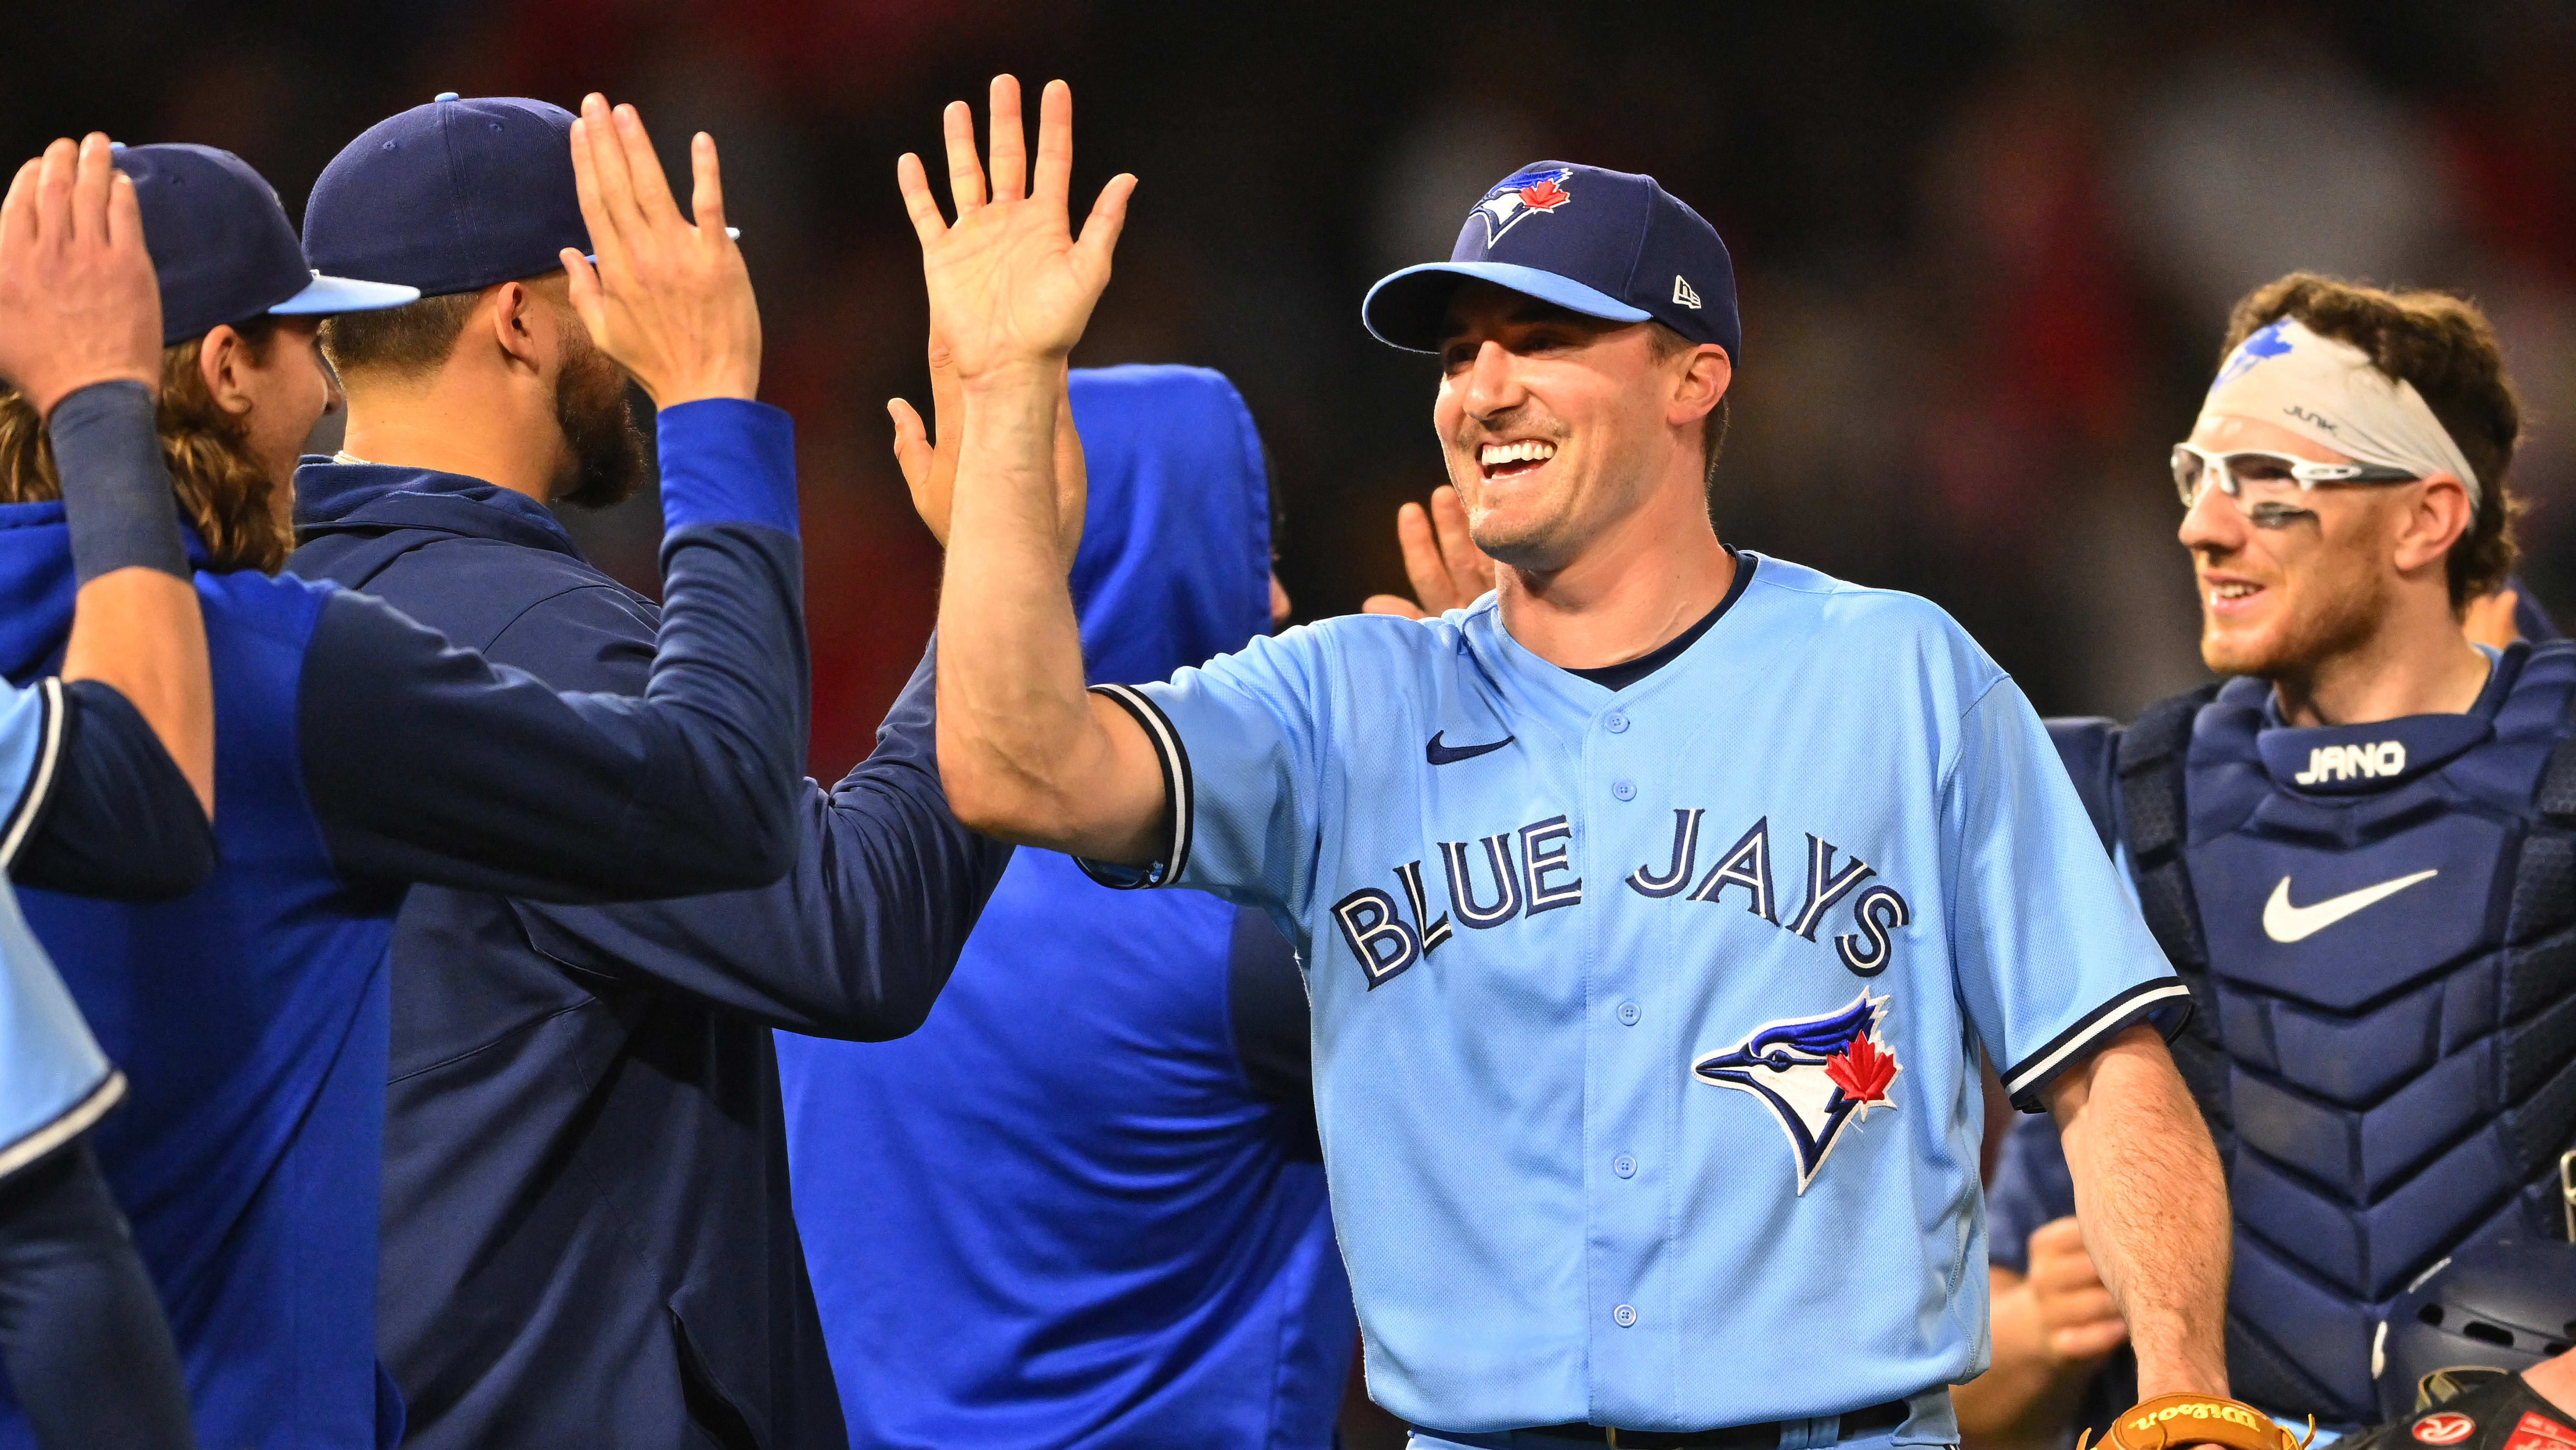 Stripes Re-Coloured, Stars Removed from Toronto Blue Jays 4th of